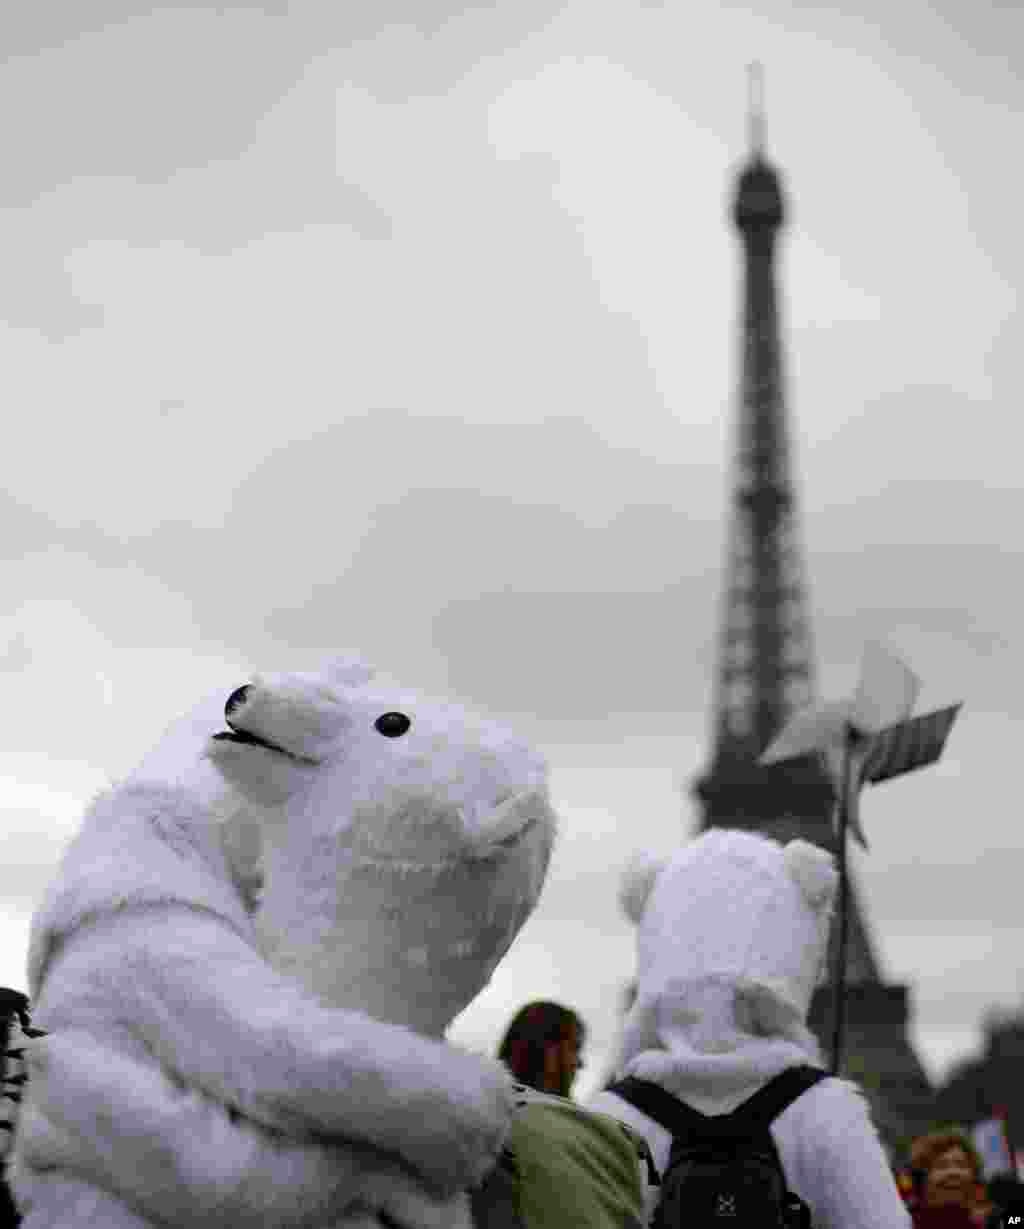 Costumed activists demonstrate near the Eiffel Tower.